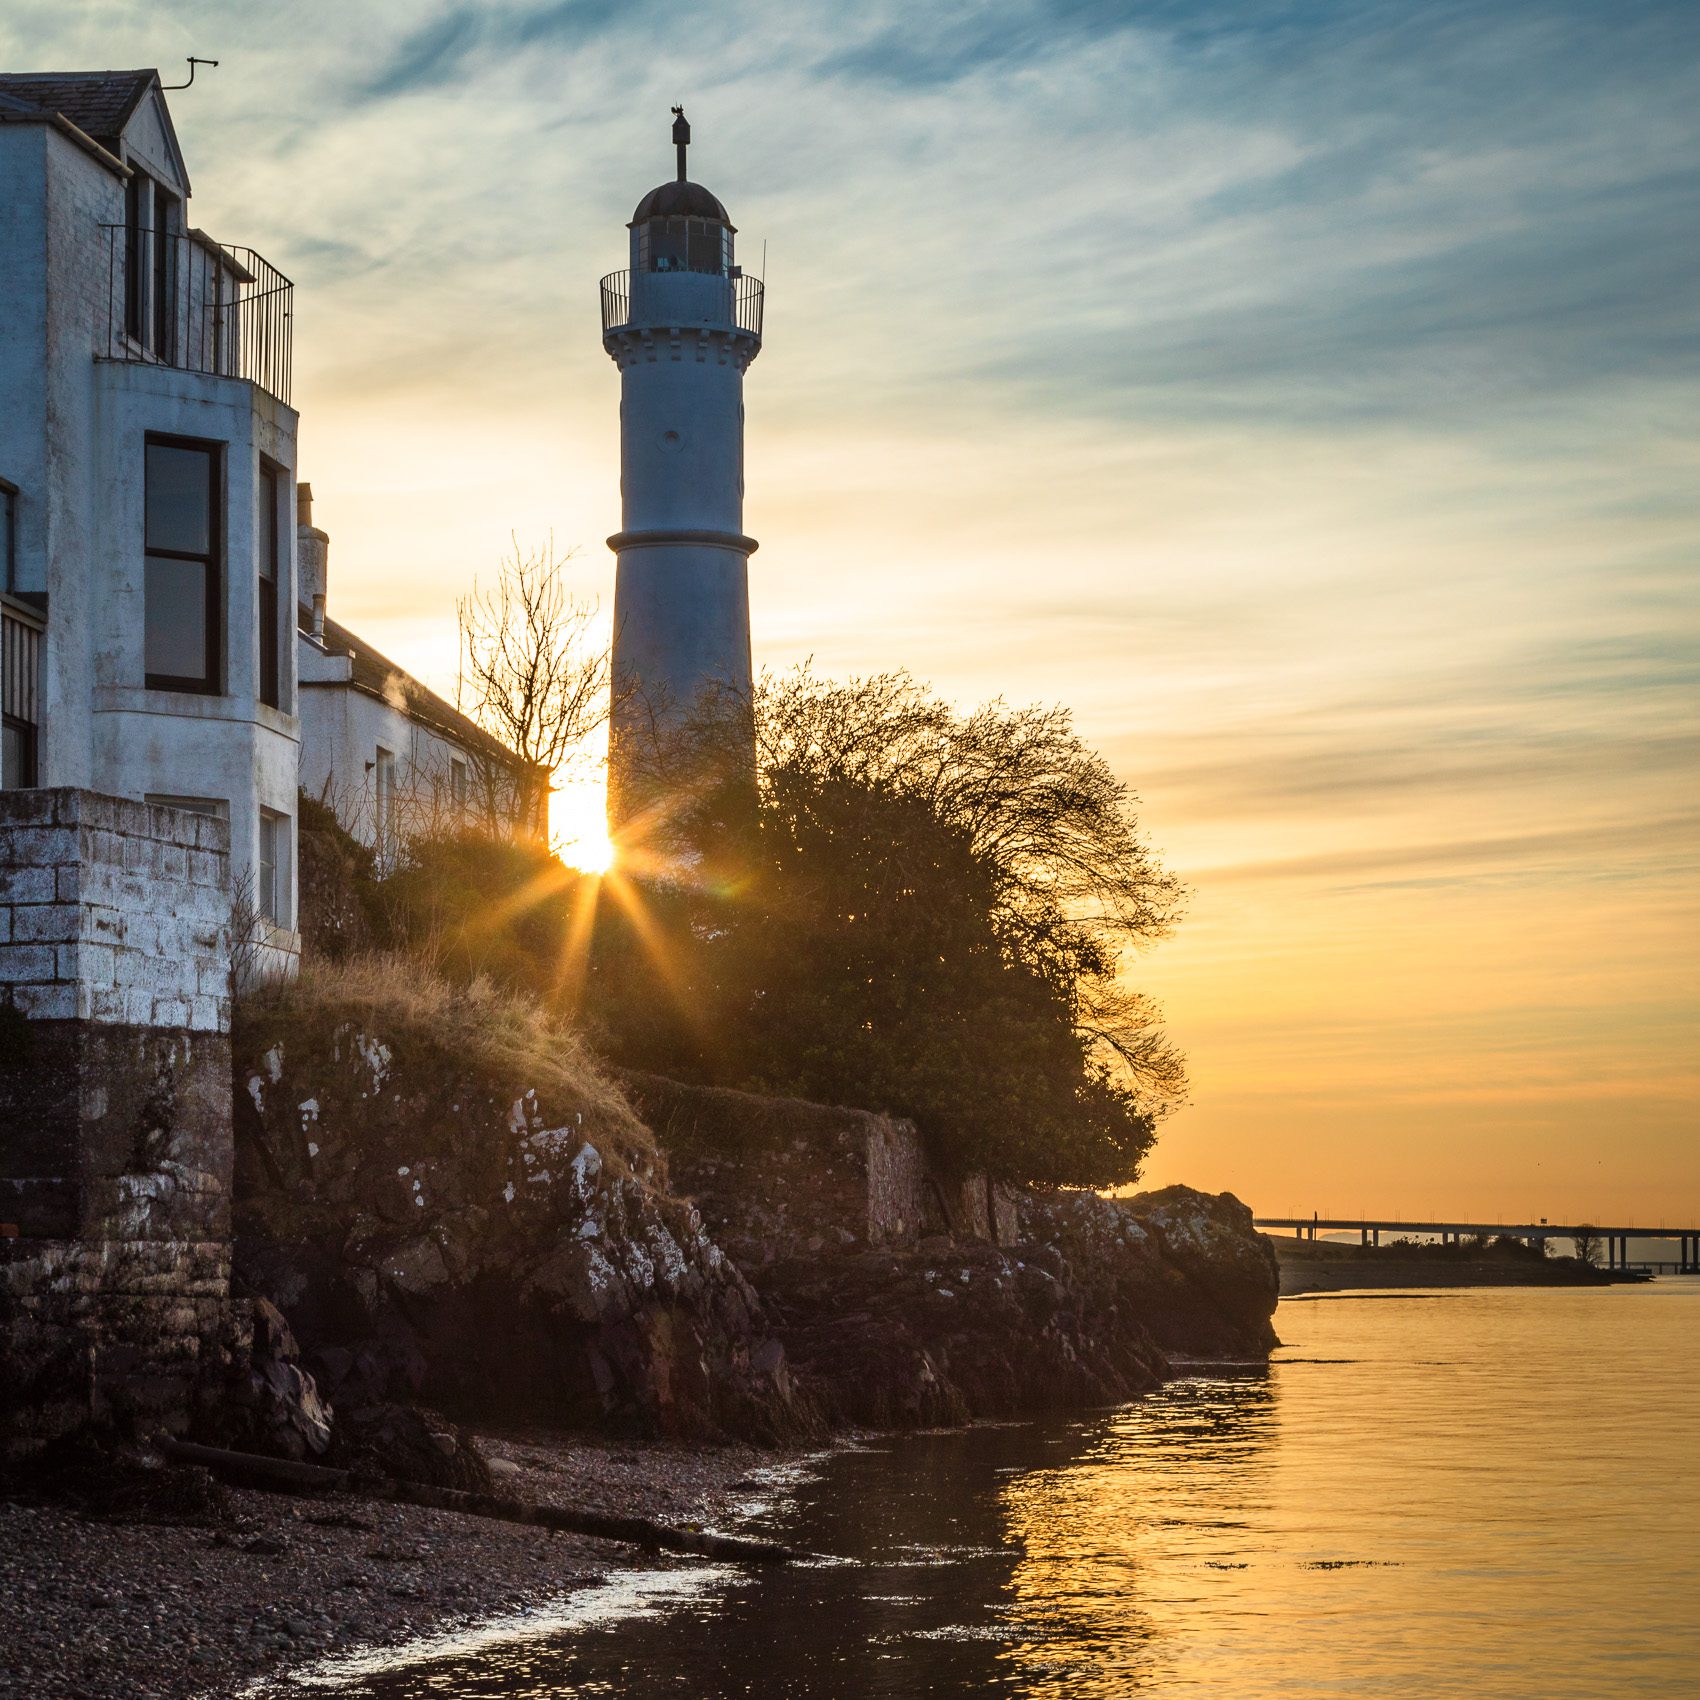 Sun setting behind Tayport West Lighthouse on the Firth of Tay, Fife, Scotland RT003